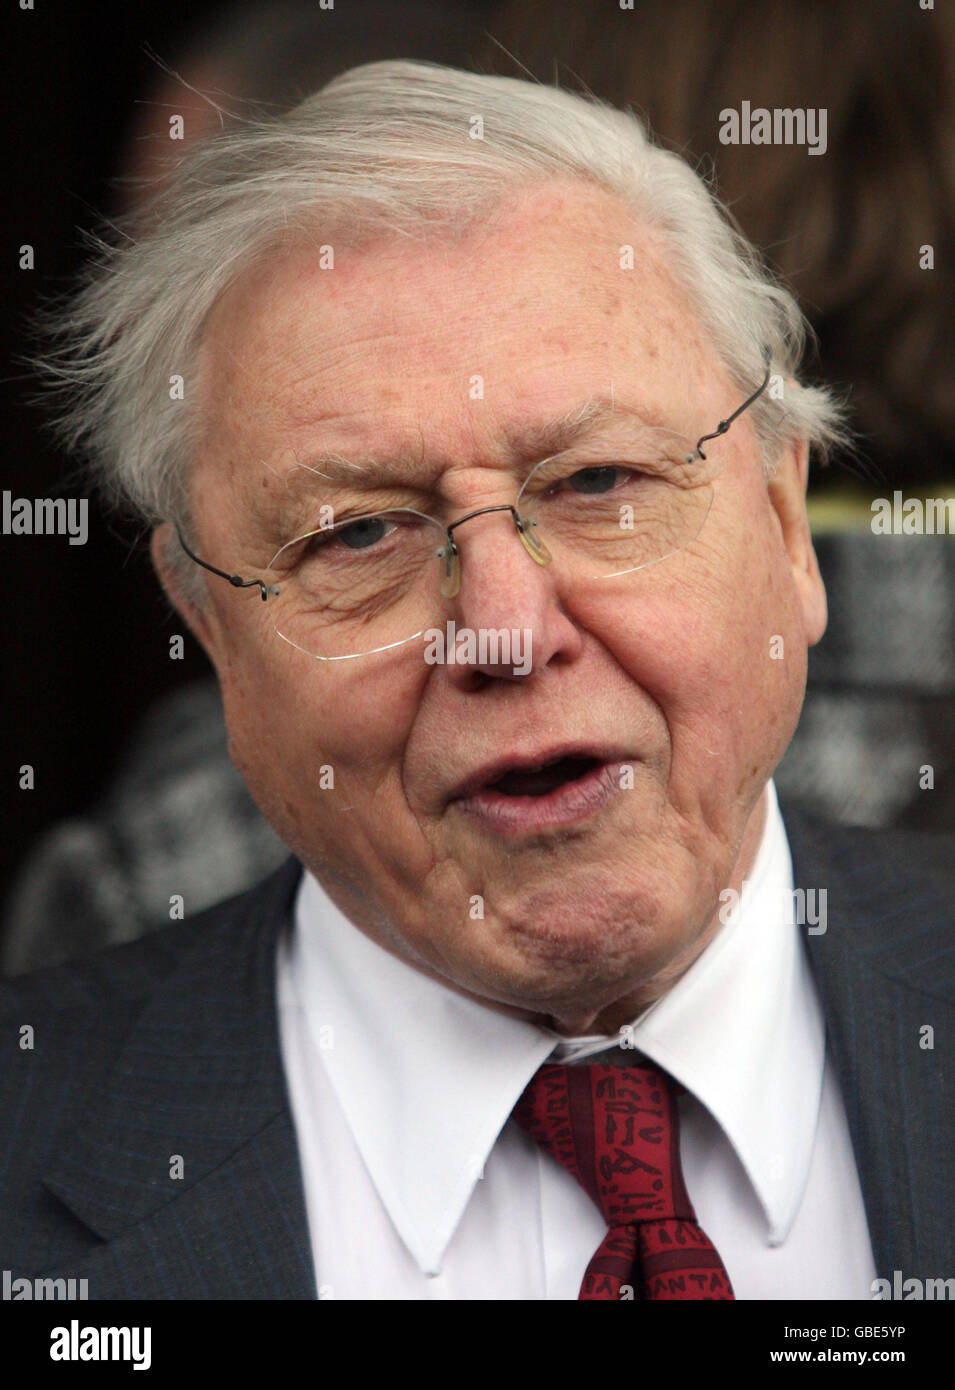 Sir David Attenborough a memorial service for Sir Bill the BBC entertainment executive, at St Martins-in-the-Fields, Trafalgar Square, London Stock Photo -